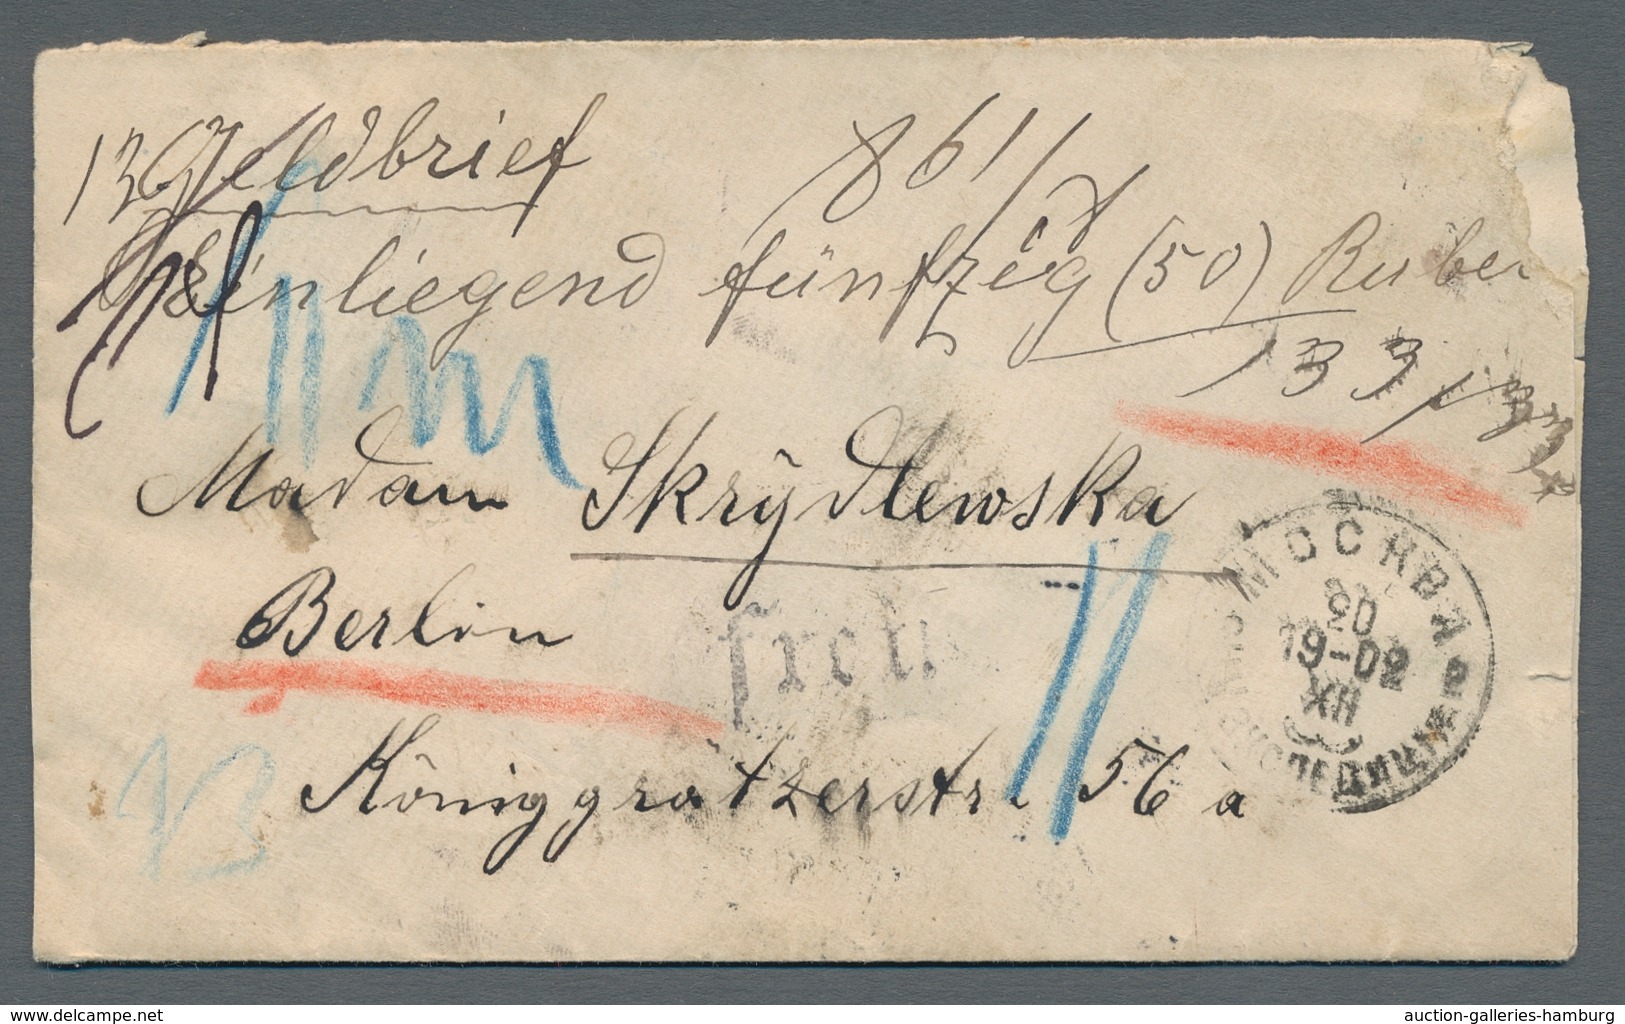 Russland: 1902-03, Two Cash Franked Insured Letters From MOSKAU 20 XII 1902 Resp. LIBAVA 2 X 1903 To - Briefe U. Dokumente